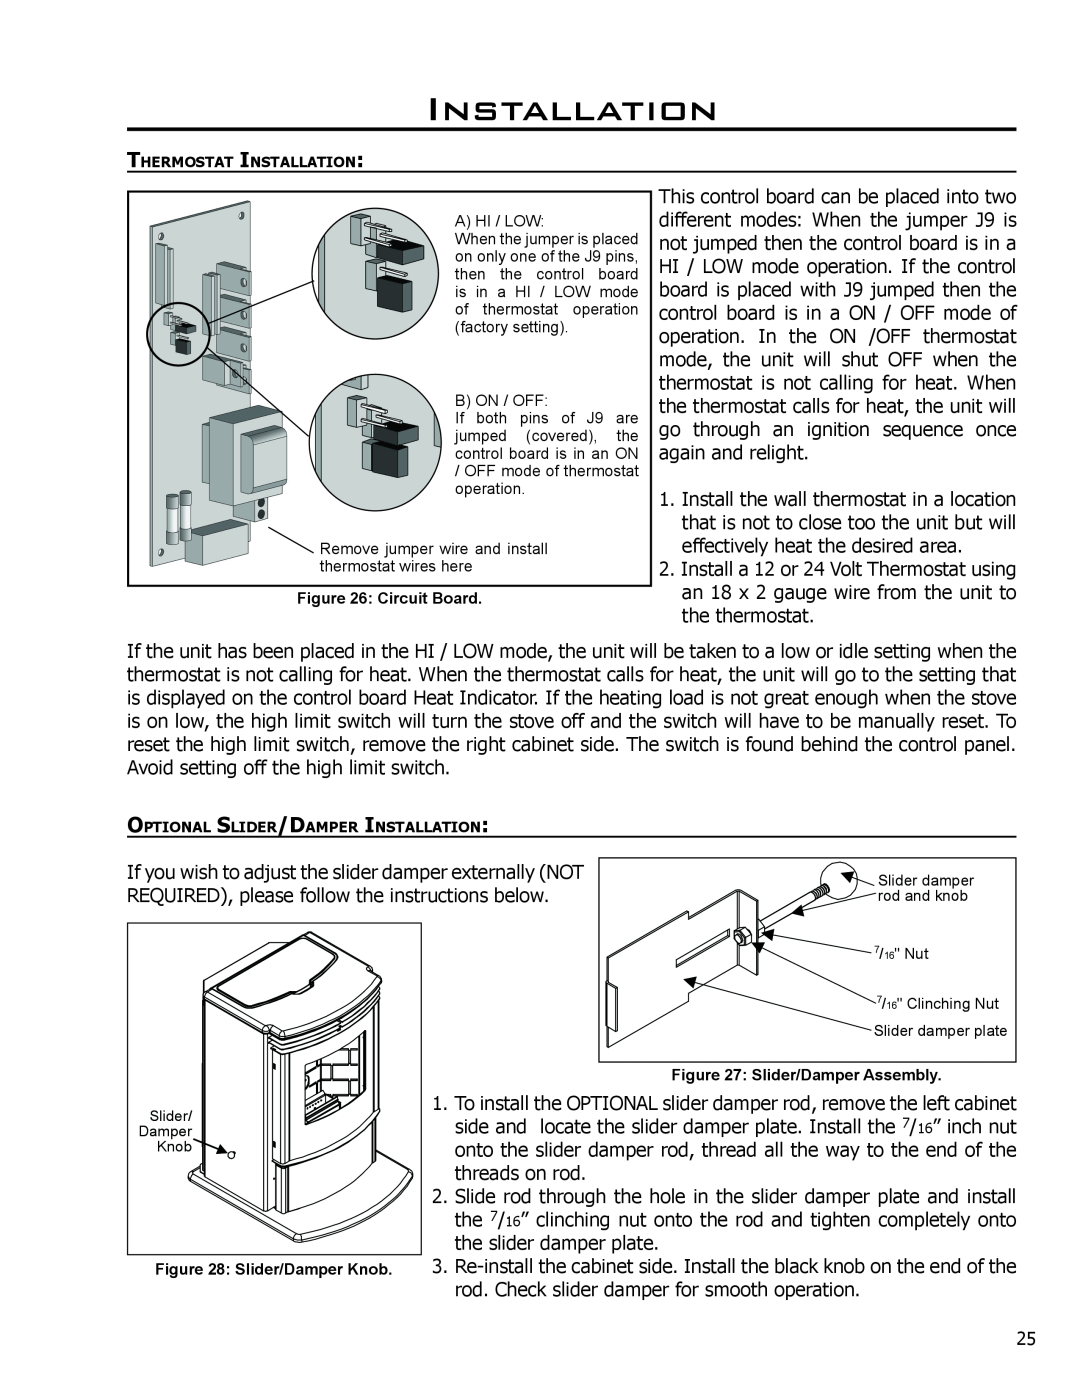 Enviro C-11023 If you wish to adjust the slider damper externally NOT, REQUIRED, please follow the instructions below 